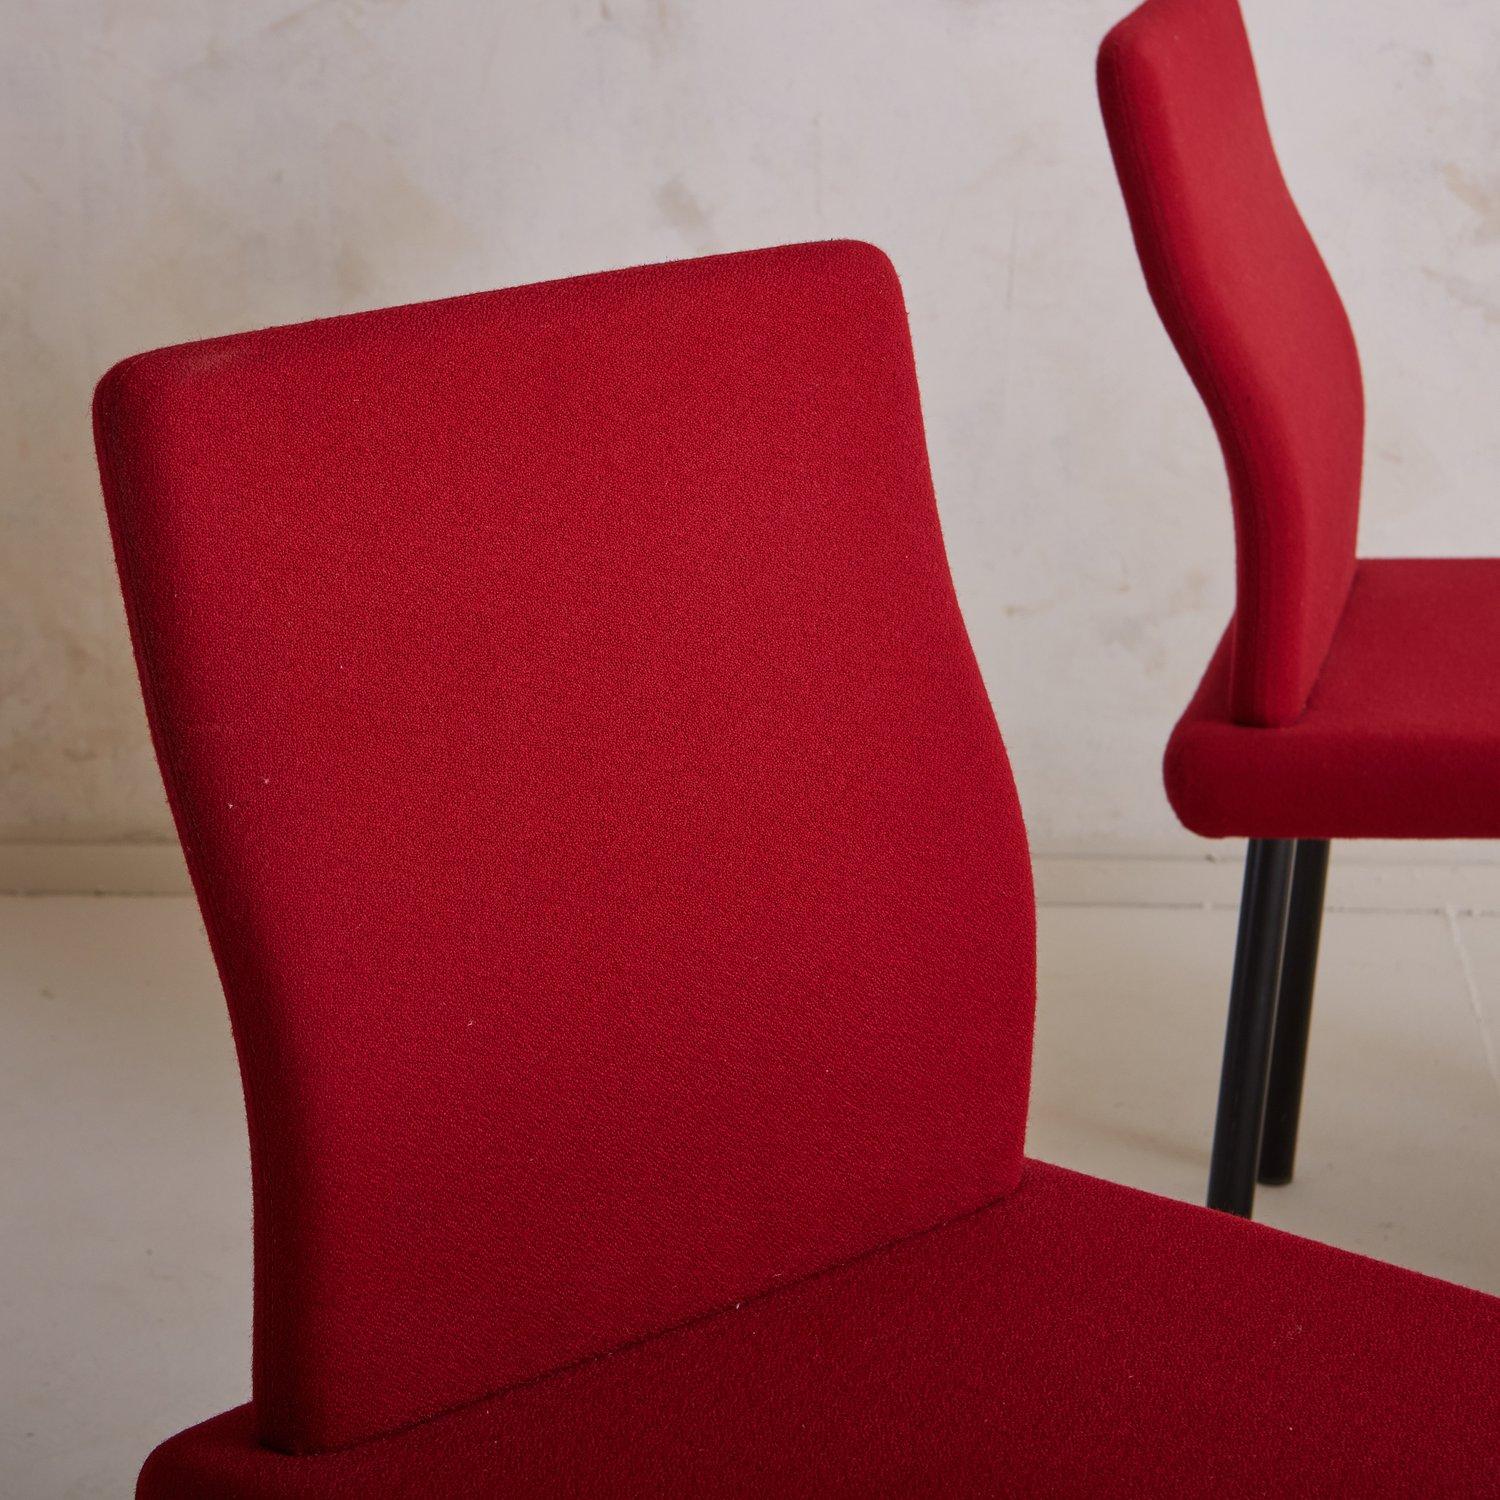 Italian Red Mandarin Chair Attributed to Ettore Sottsass for Knoll, 1990s  For Sale